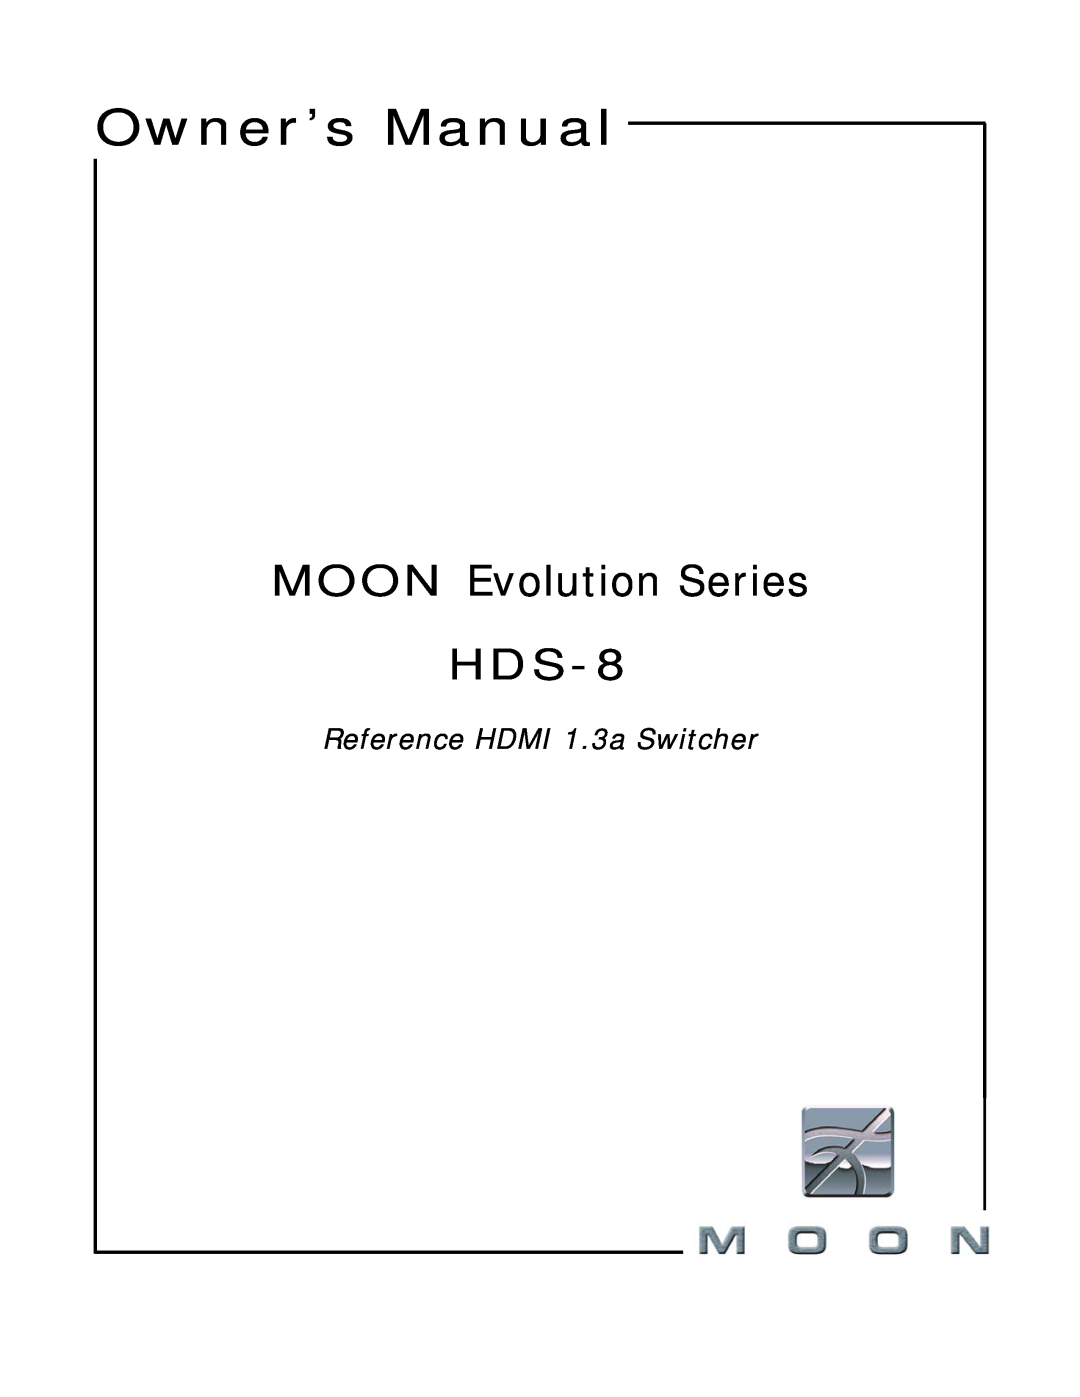 Simaudio owner manual MOON Evolution Series HDS-8, Owner’s Manual, Reference HDMI 1.3a Switcher 